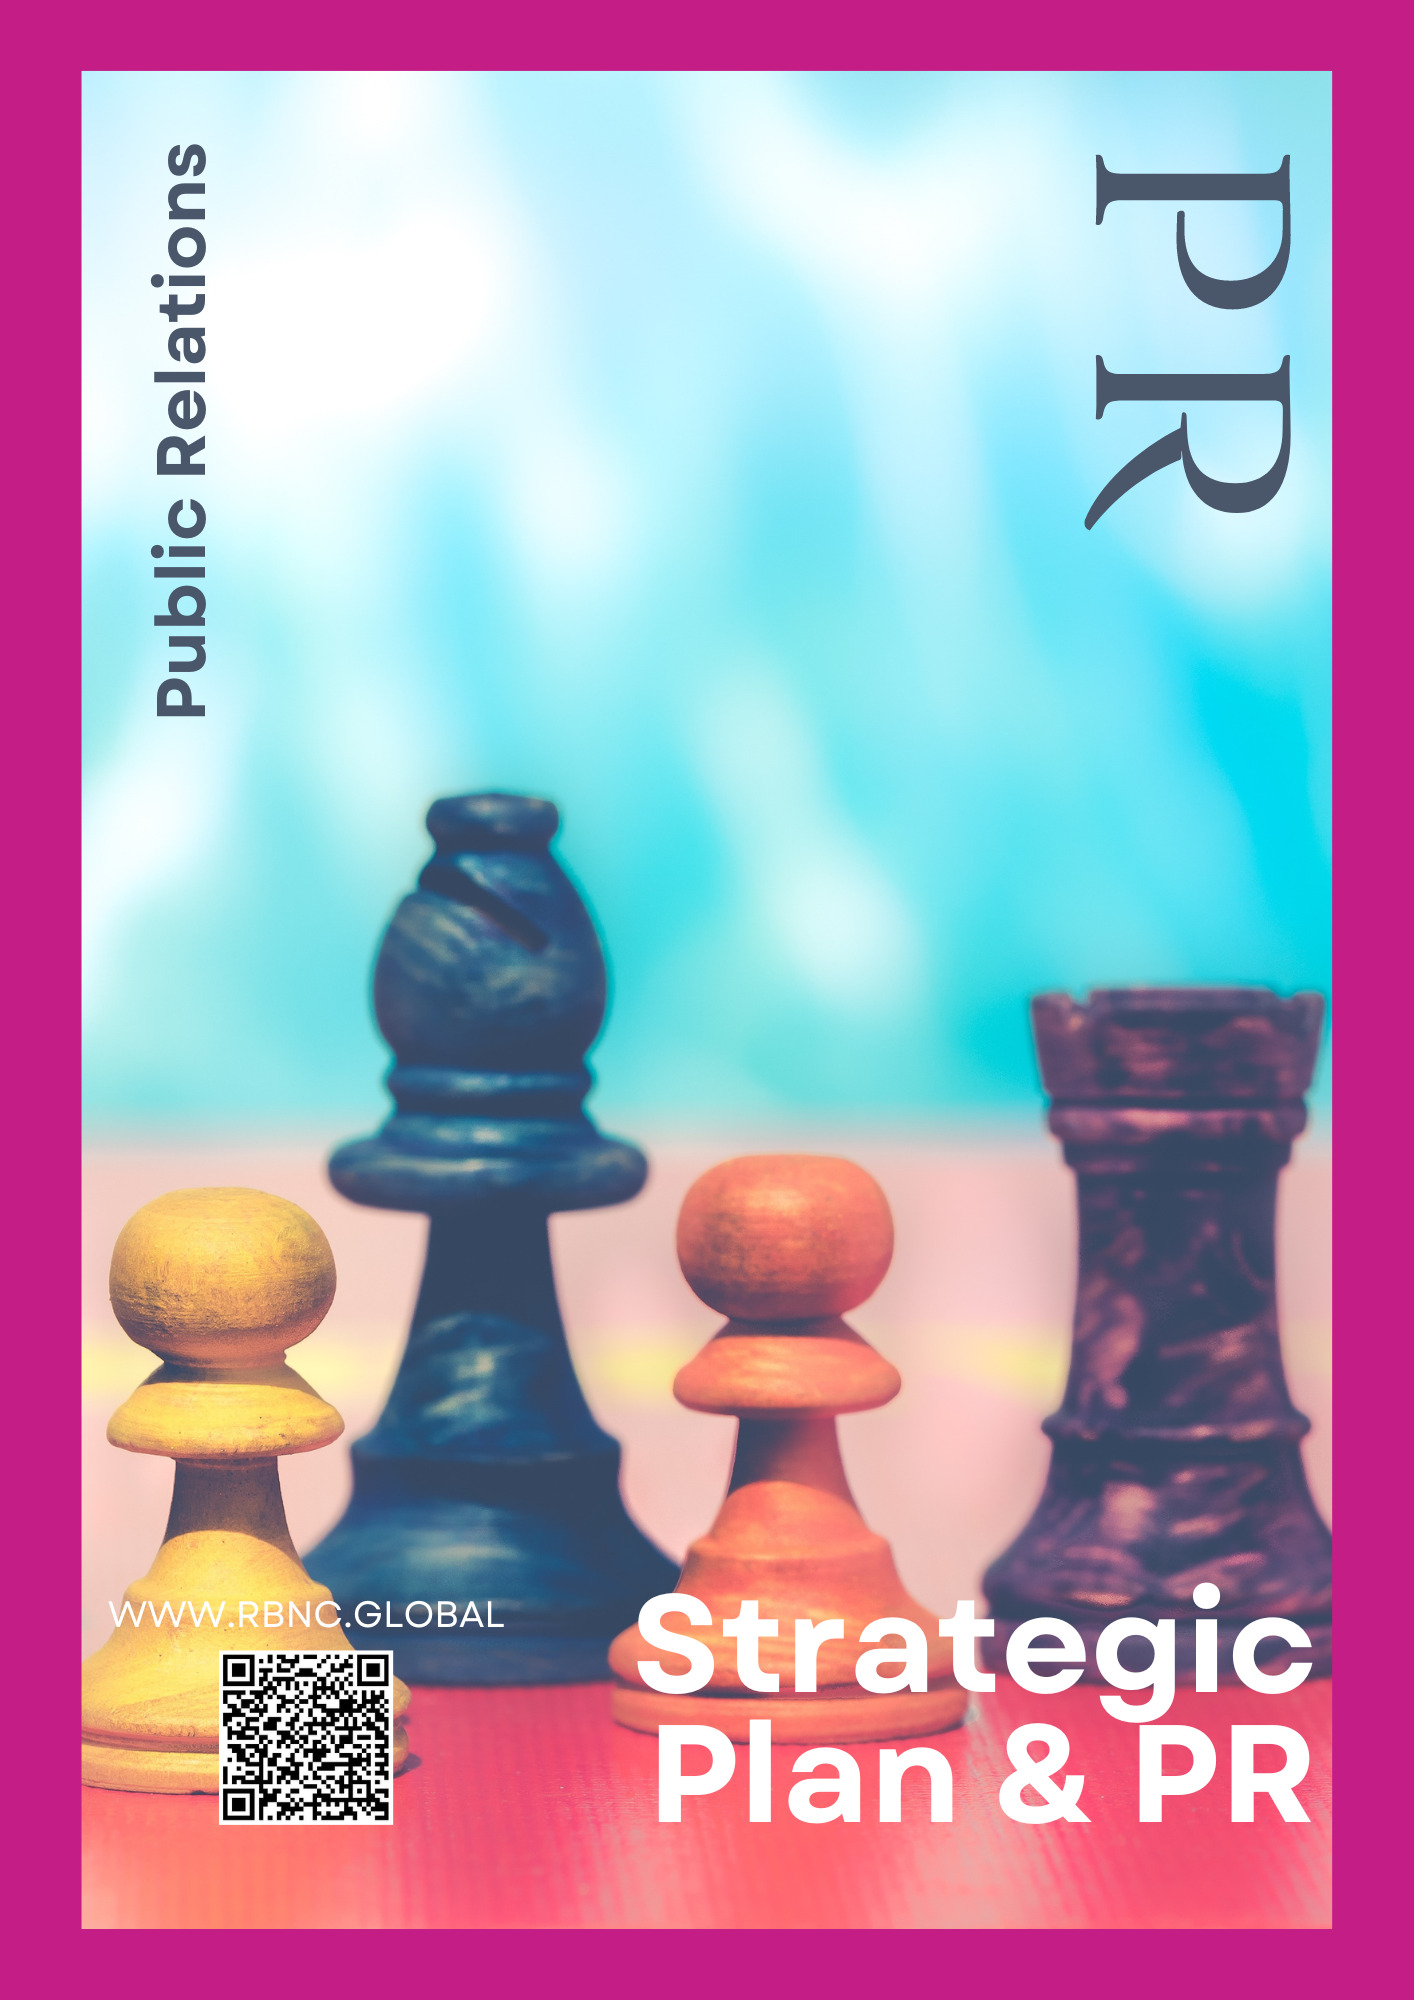 How Public Relations (PR) Can Contribute to the Strategic Planning